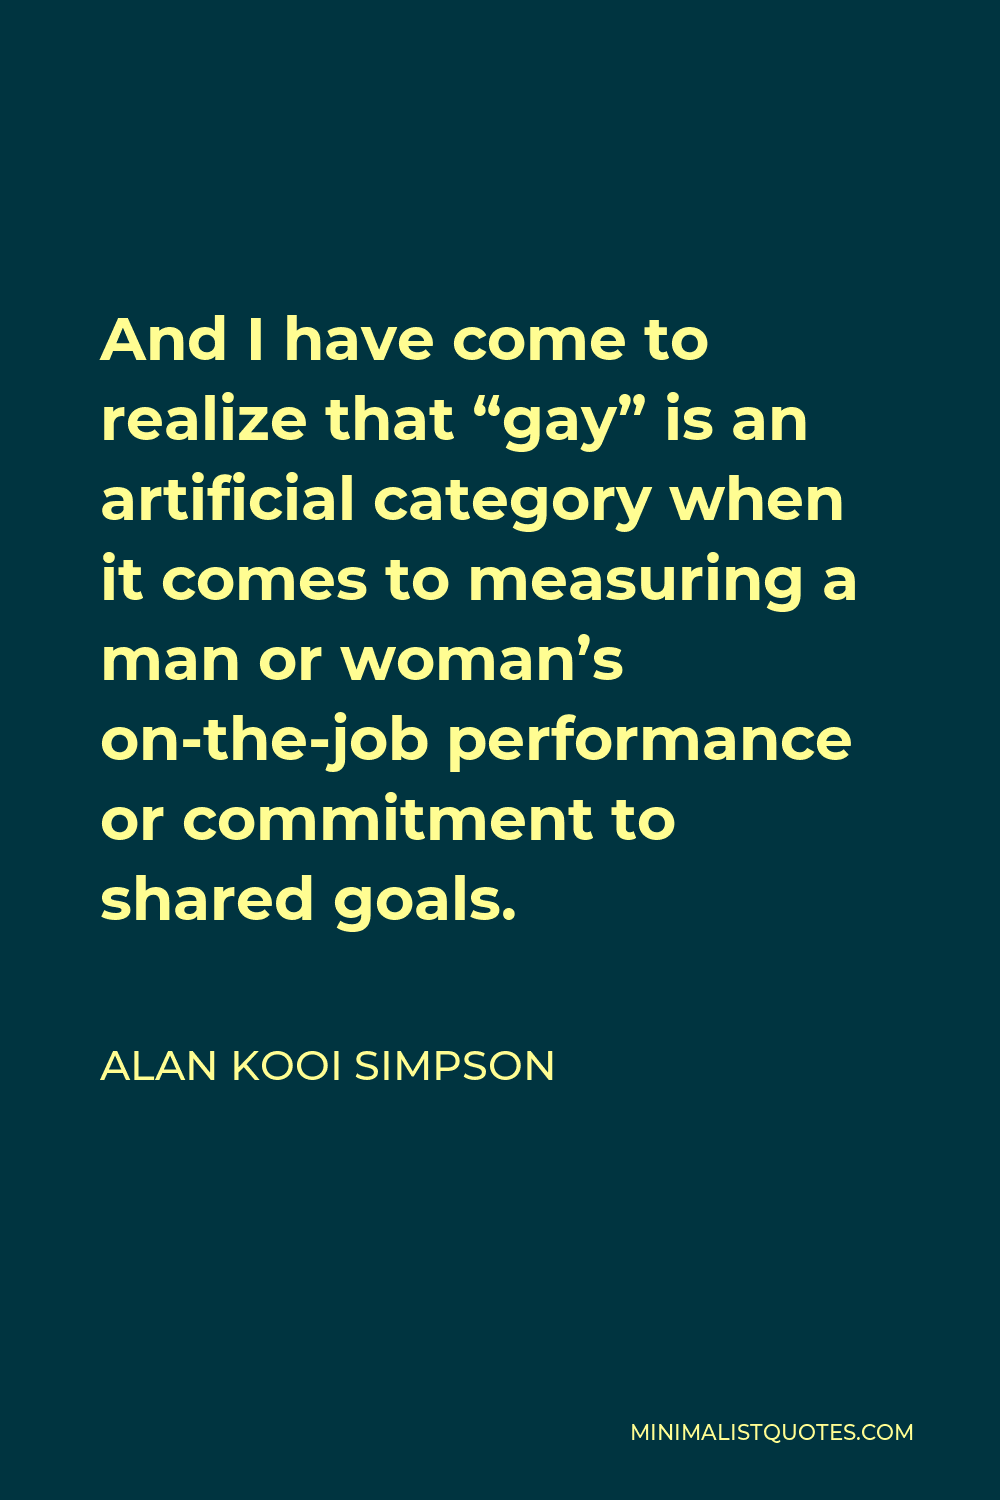 Alan Kooi Simpson Quote - And I have come to realize that “gay” is an artificial category when it comes to measuring a man or woman’s on-the-job performance or commitment to shared goals.